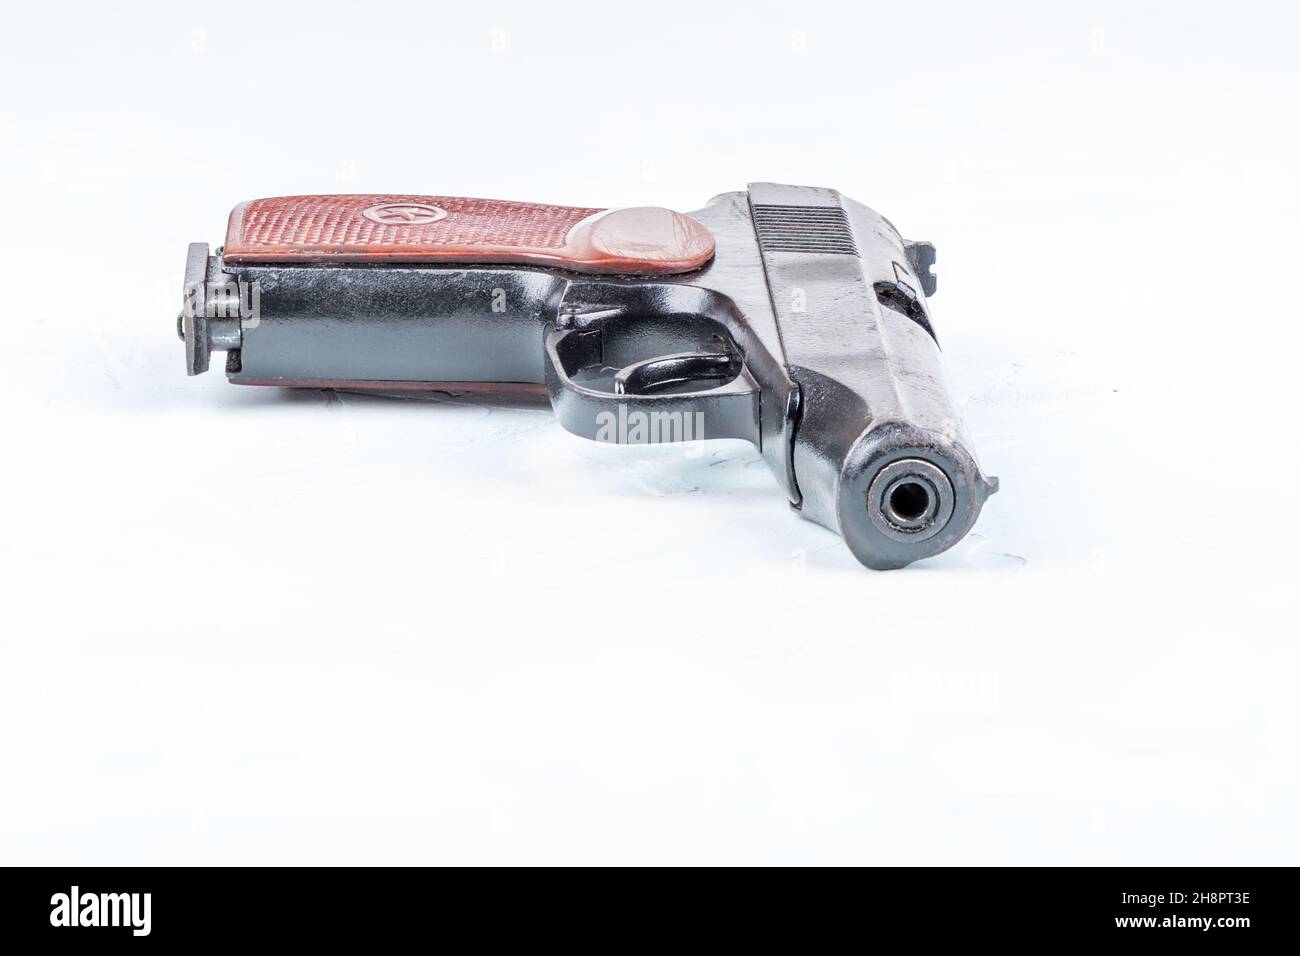 Used Makarov pistol on a light blue background with space for text. Close up. Stock Photo